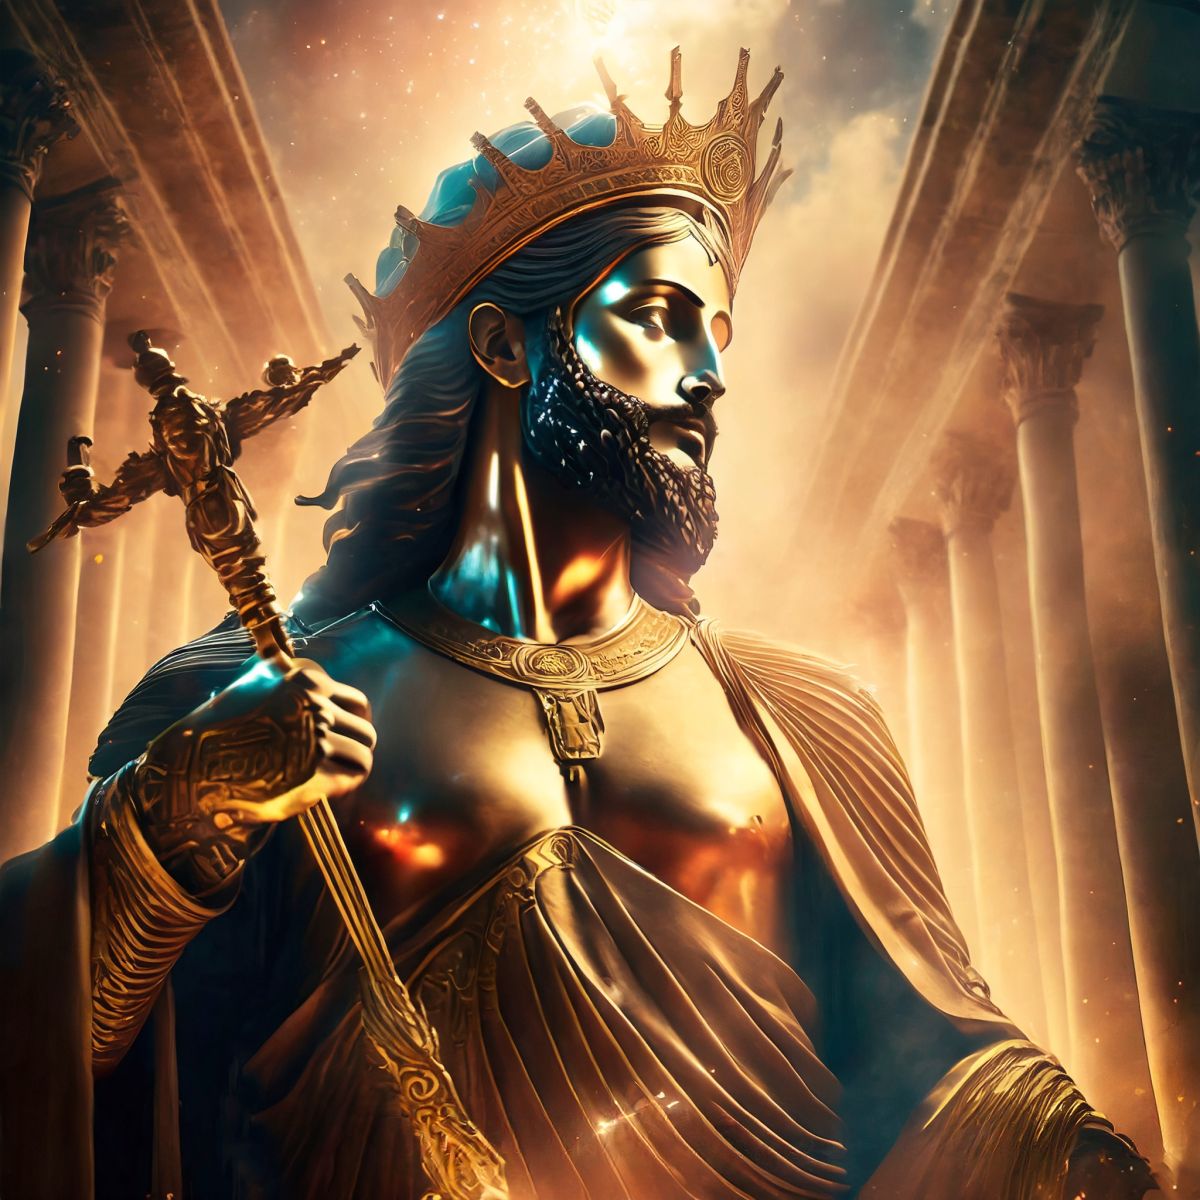 A painting of Zeus, King of the Gods.